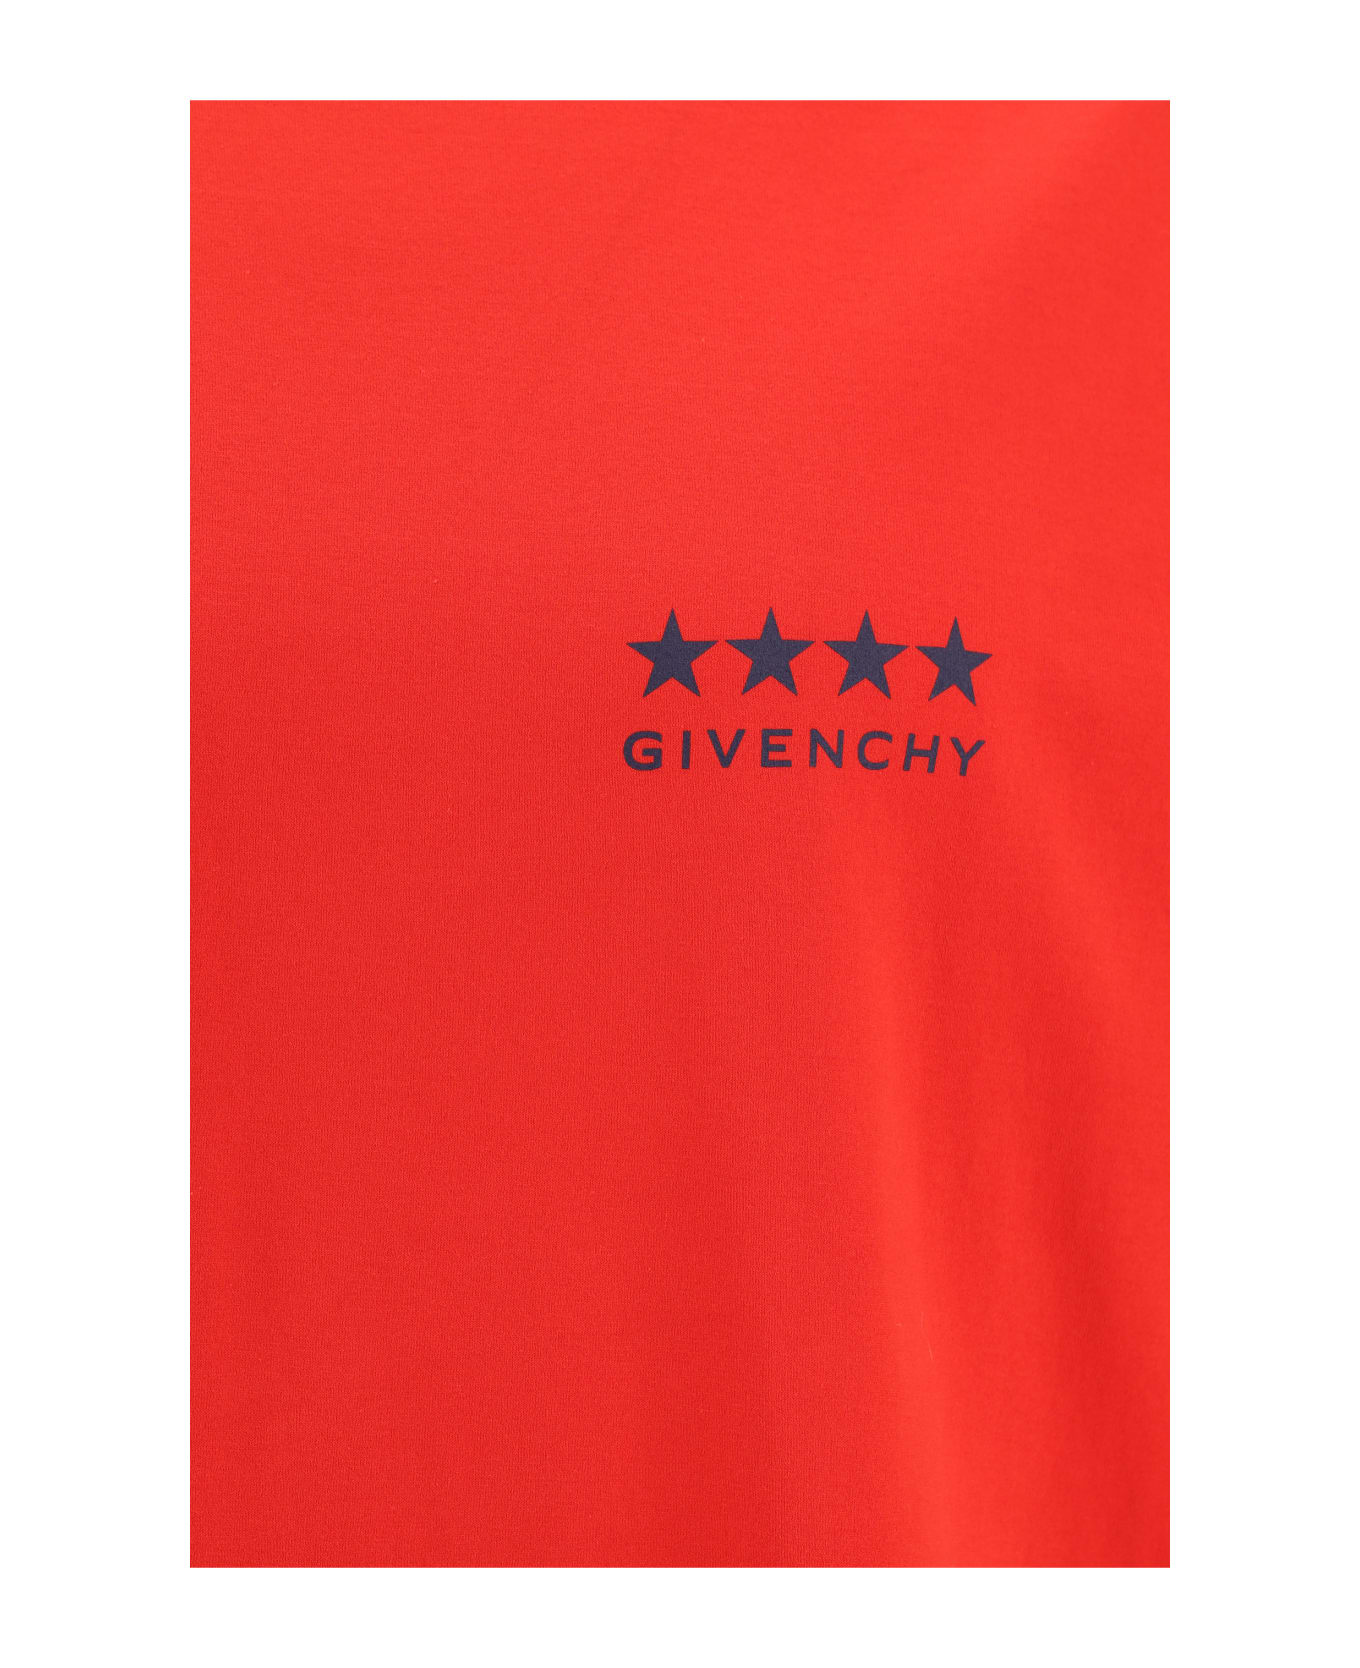 Givenchy 4g Cotton T-shirt - Red